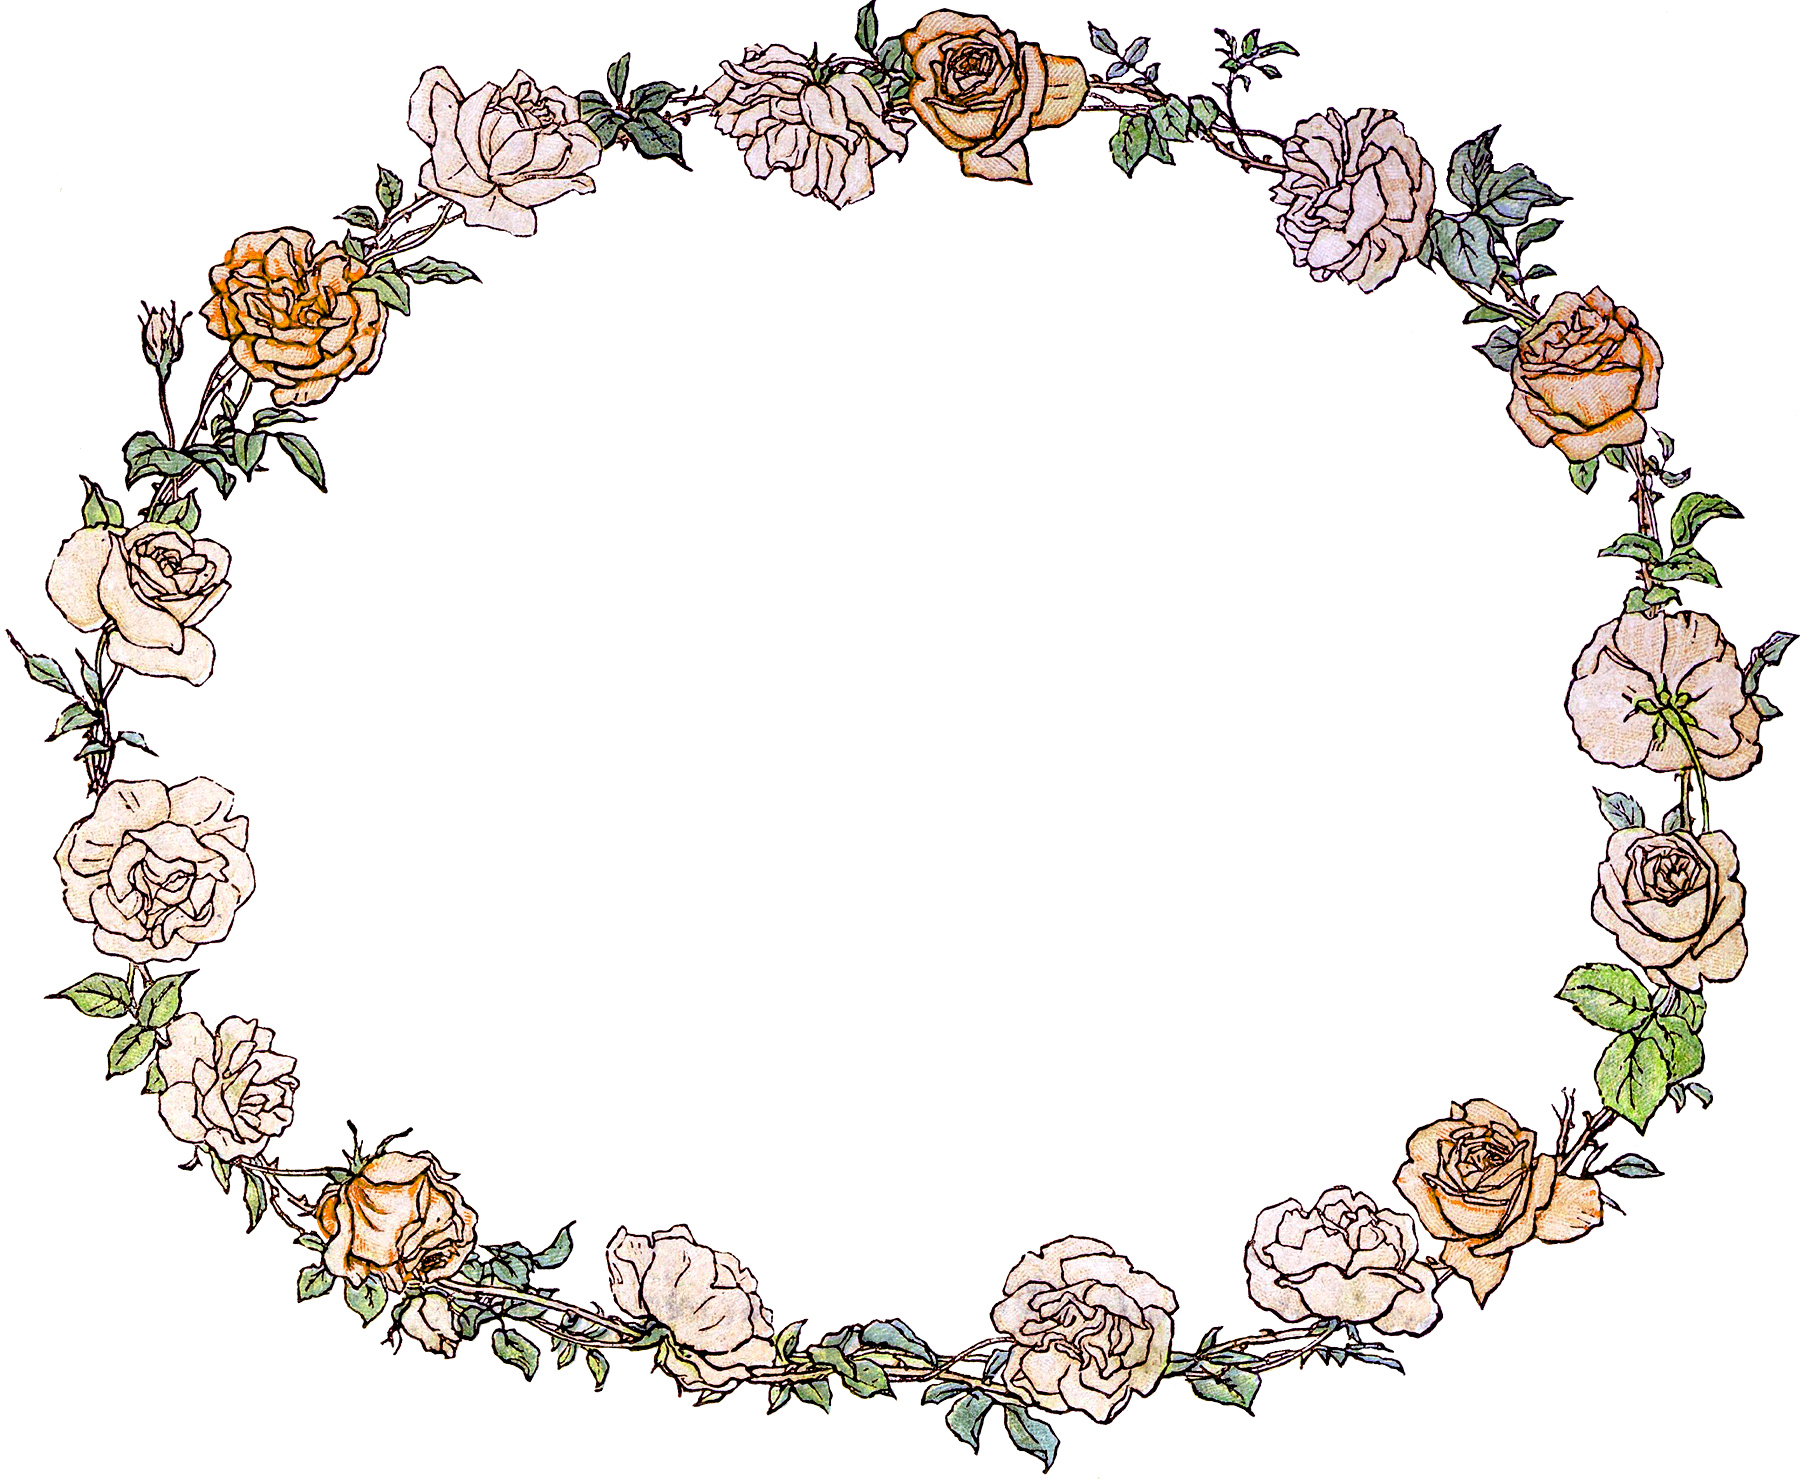 Gorgeous Vintage Roses Wreath Image! - The Graphics Fairy